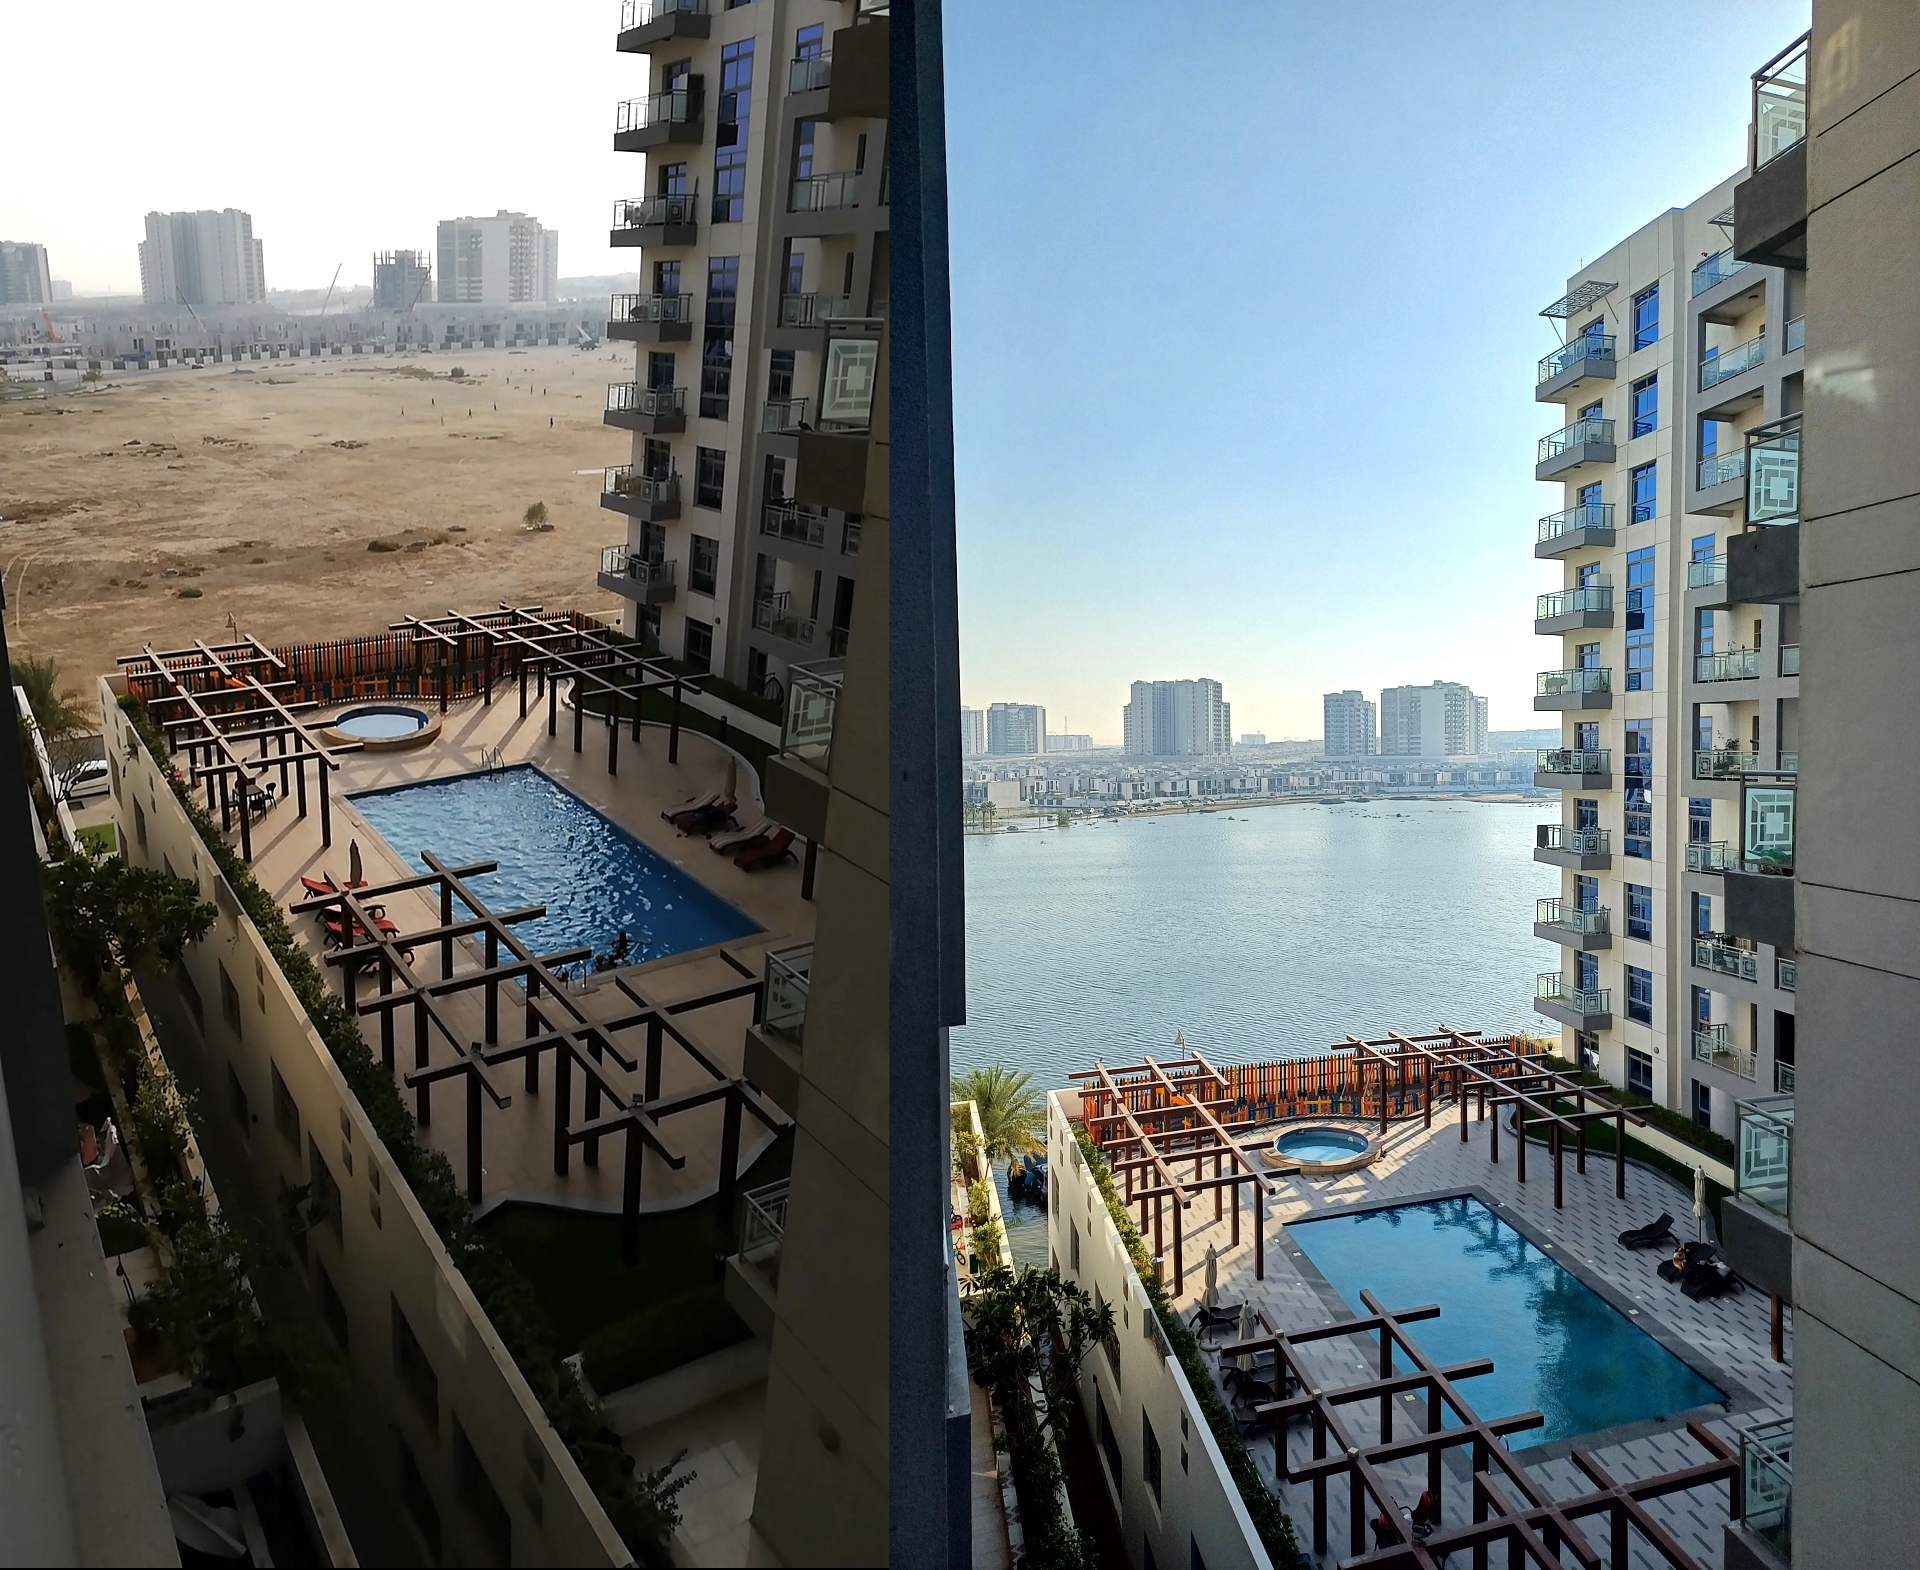 Before and after the recent storm in Dubai. I now have a lake view apartment.jpg